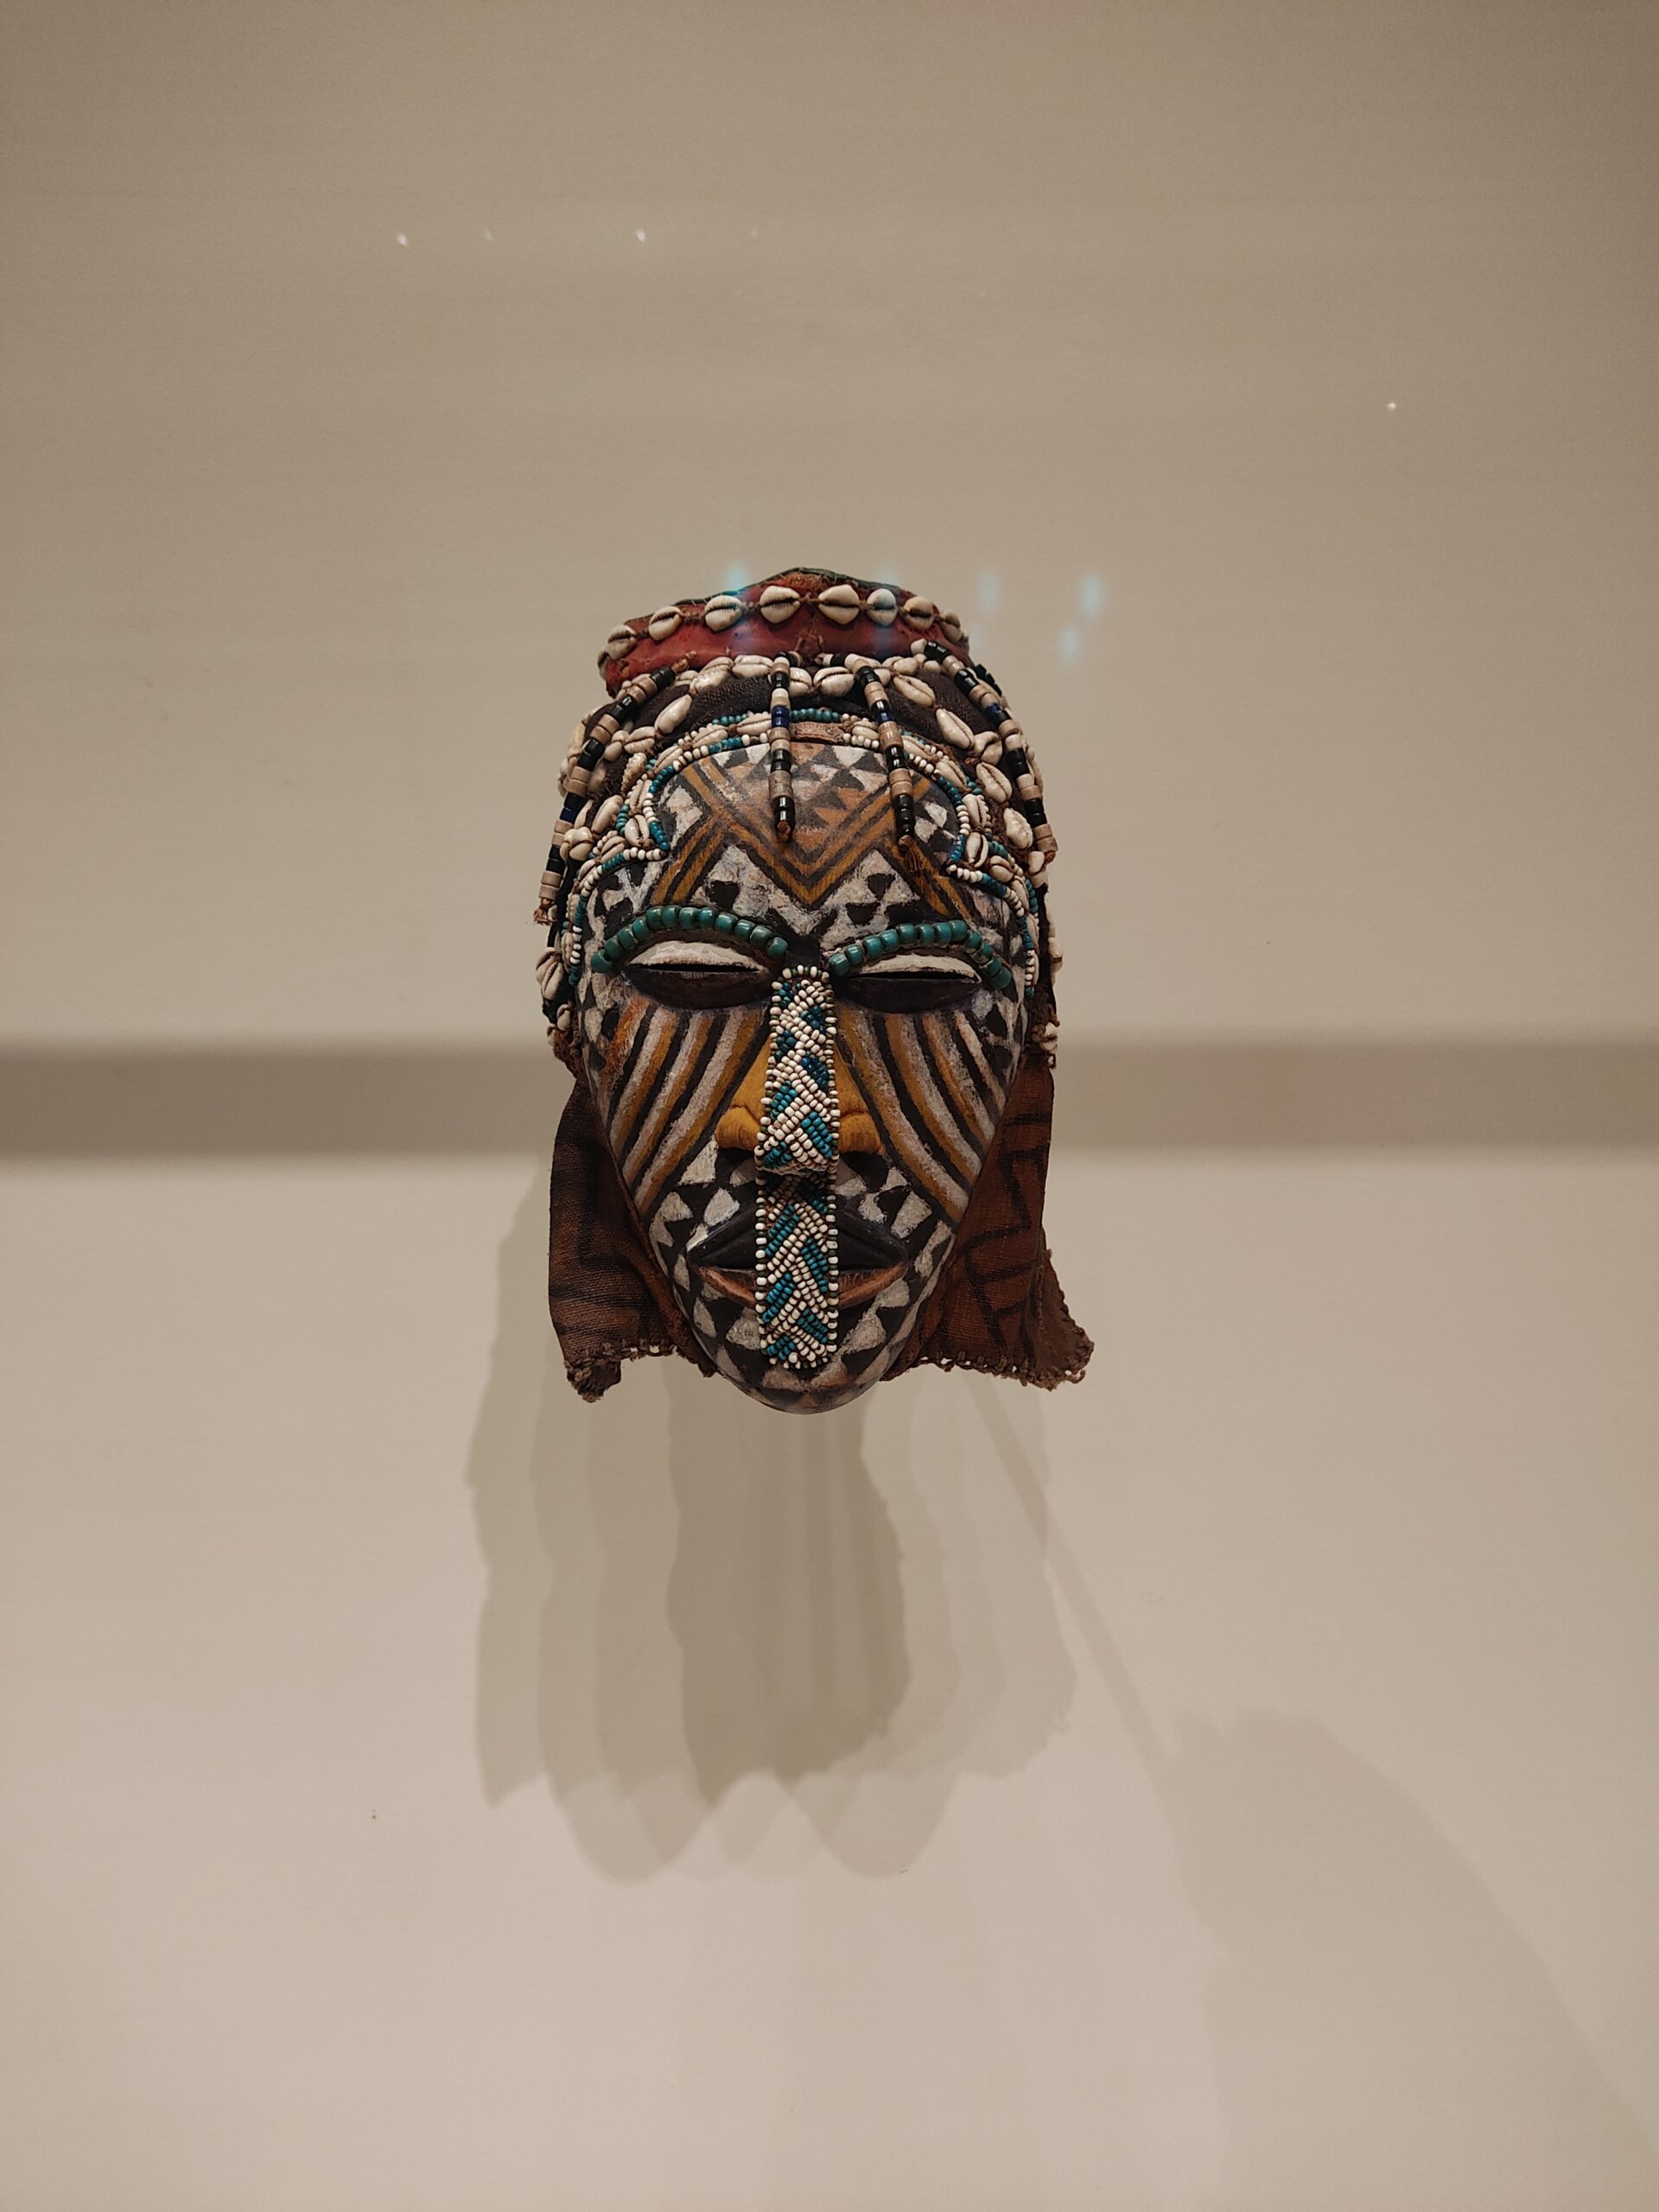 Chicago Art institute must see - Face Mask (Ngady Mwaash)KUBA